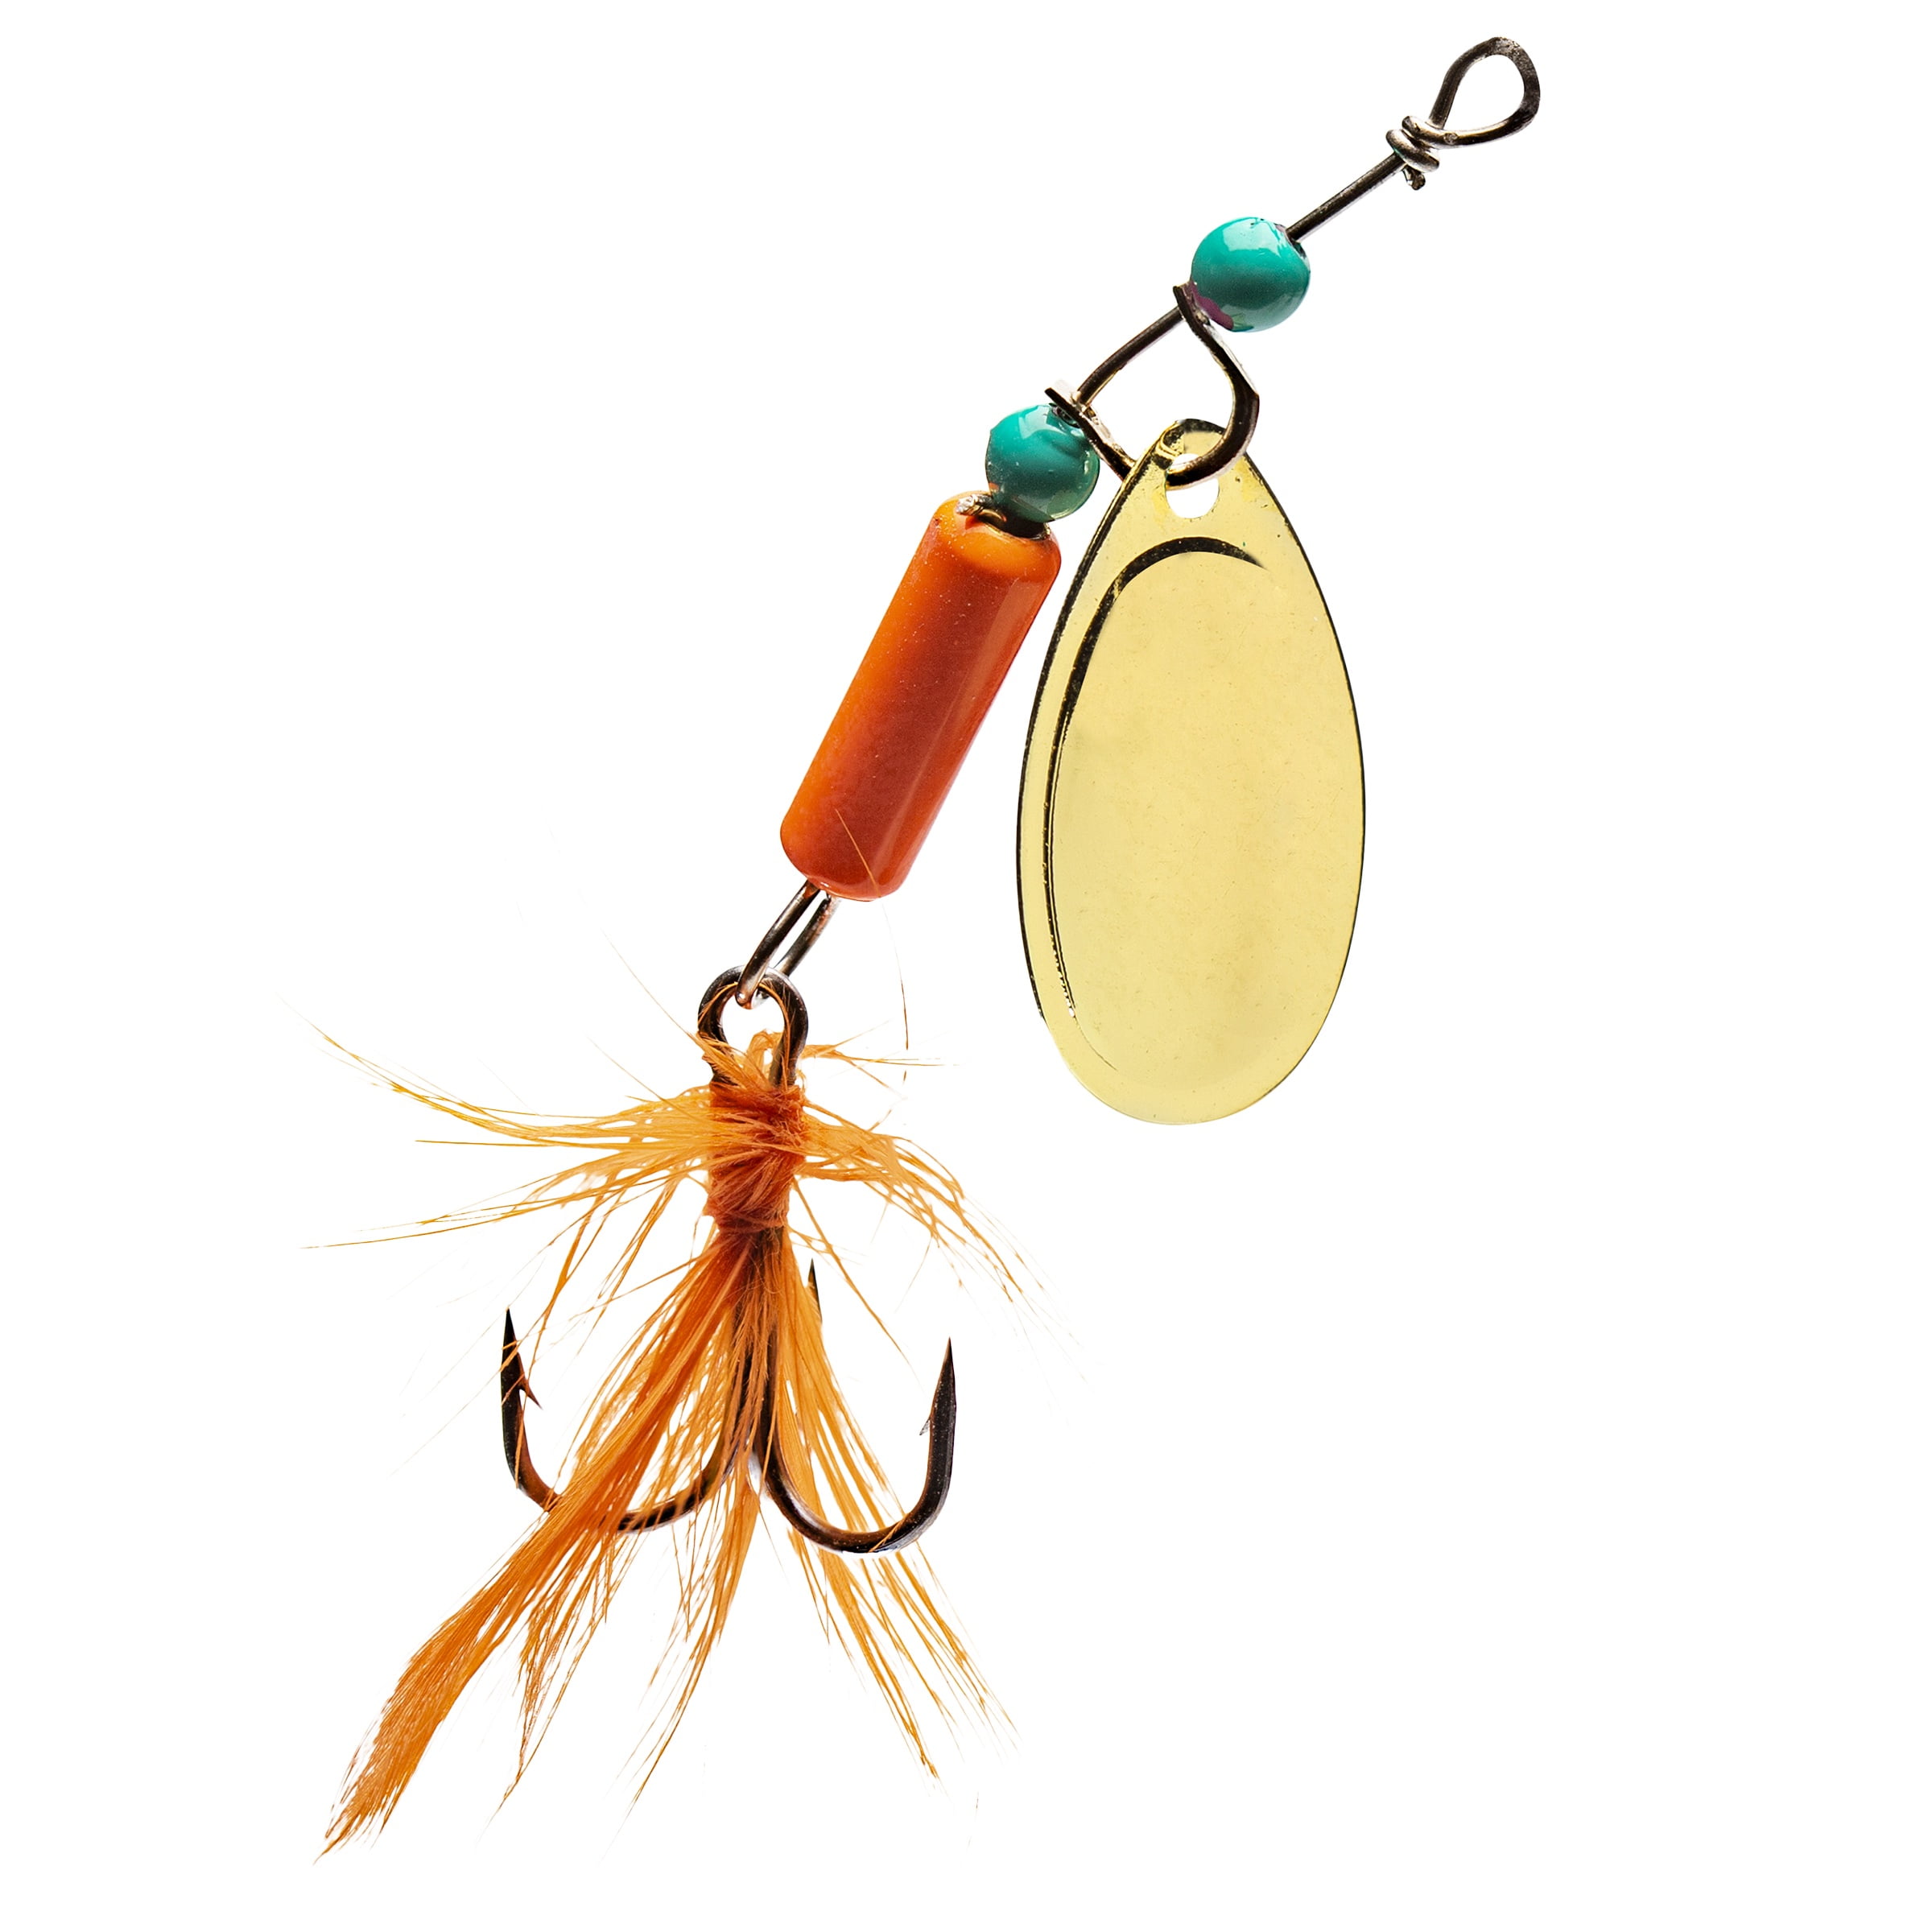 ProFISHiency 5′ Krazy 2.0 Spincast Carded Combo with Lures - Cabelas